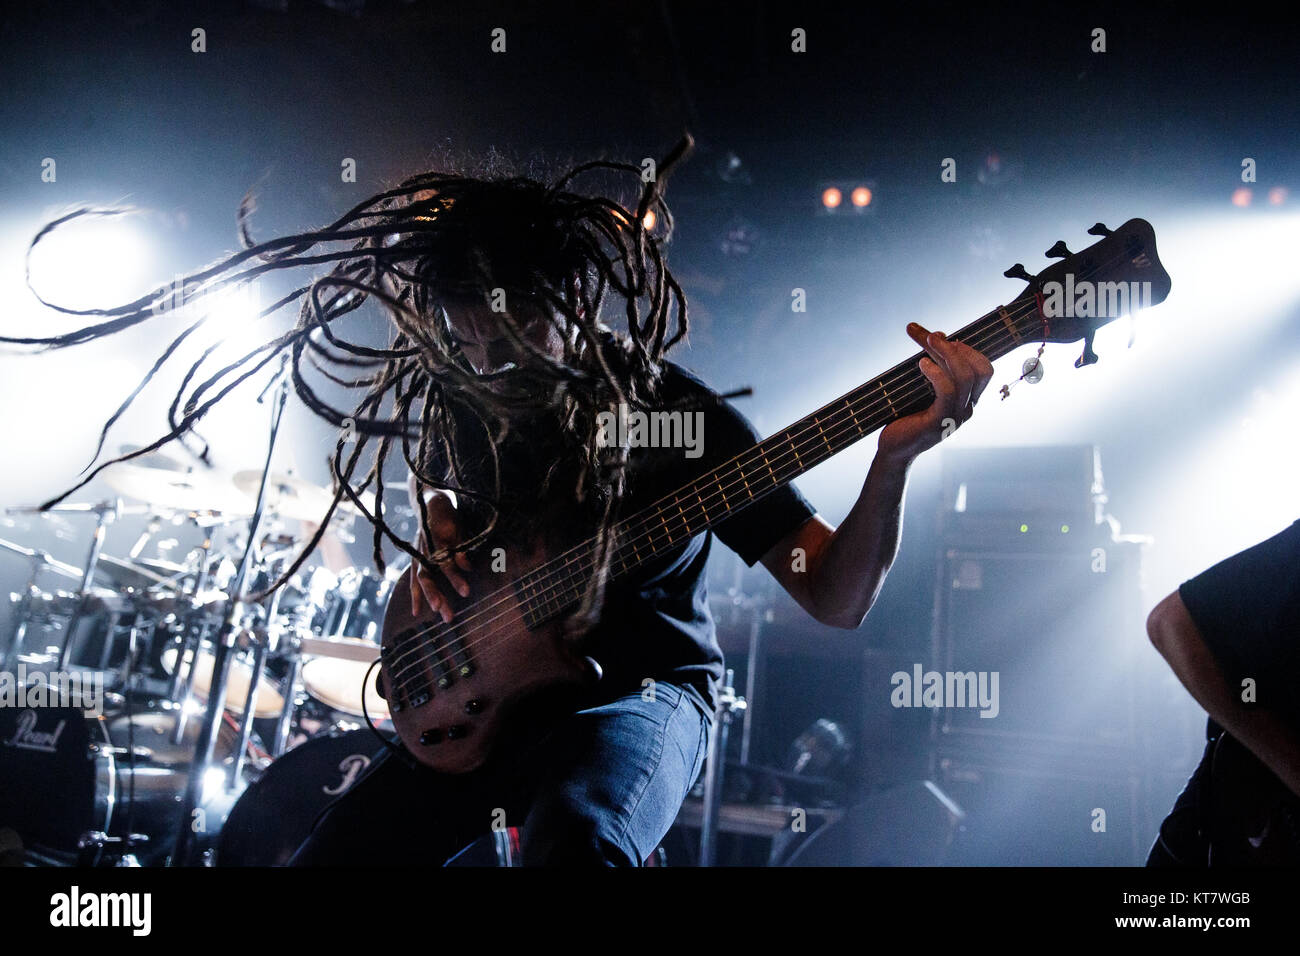 The American technical death metal band Abiotic performs a live concert at Pumpehuset in Copenhagen. Here bass player Alex Vasquez is seen live on stage. Denmark, 22/03 2016. Stock Photo